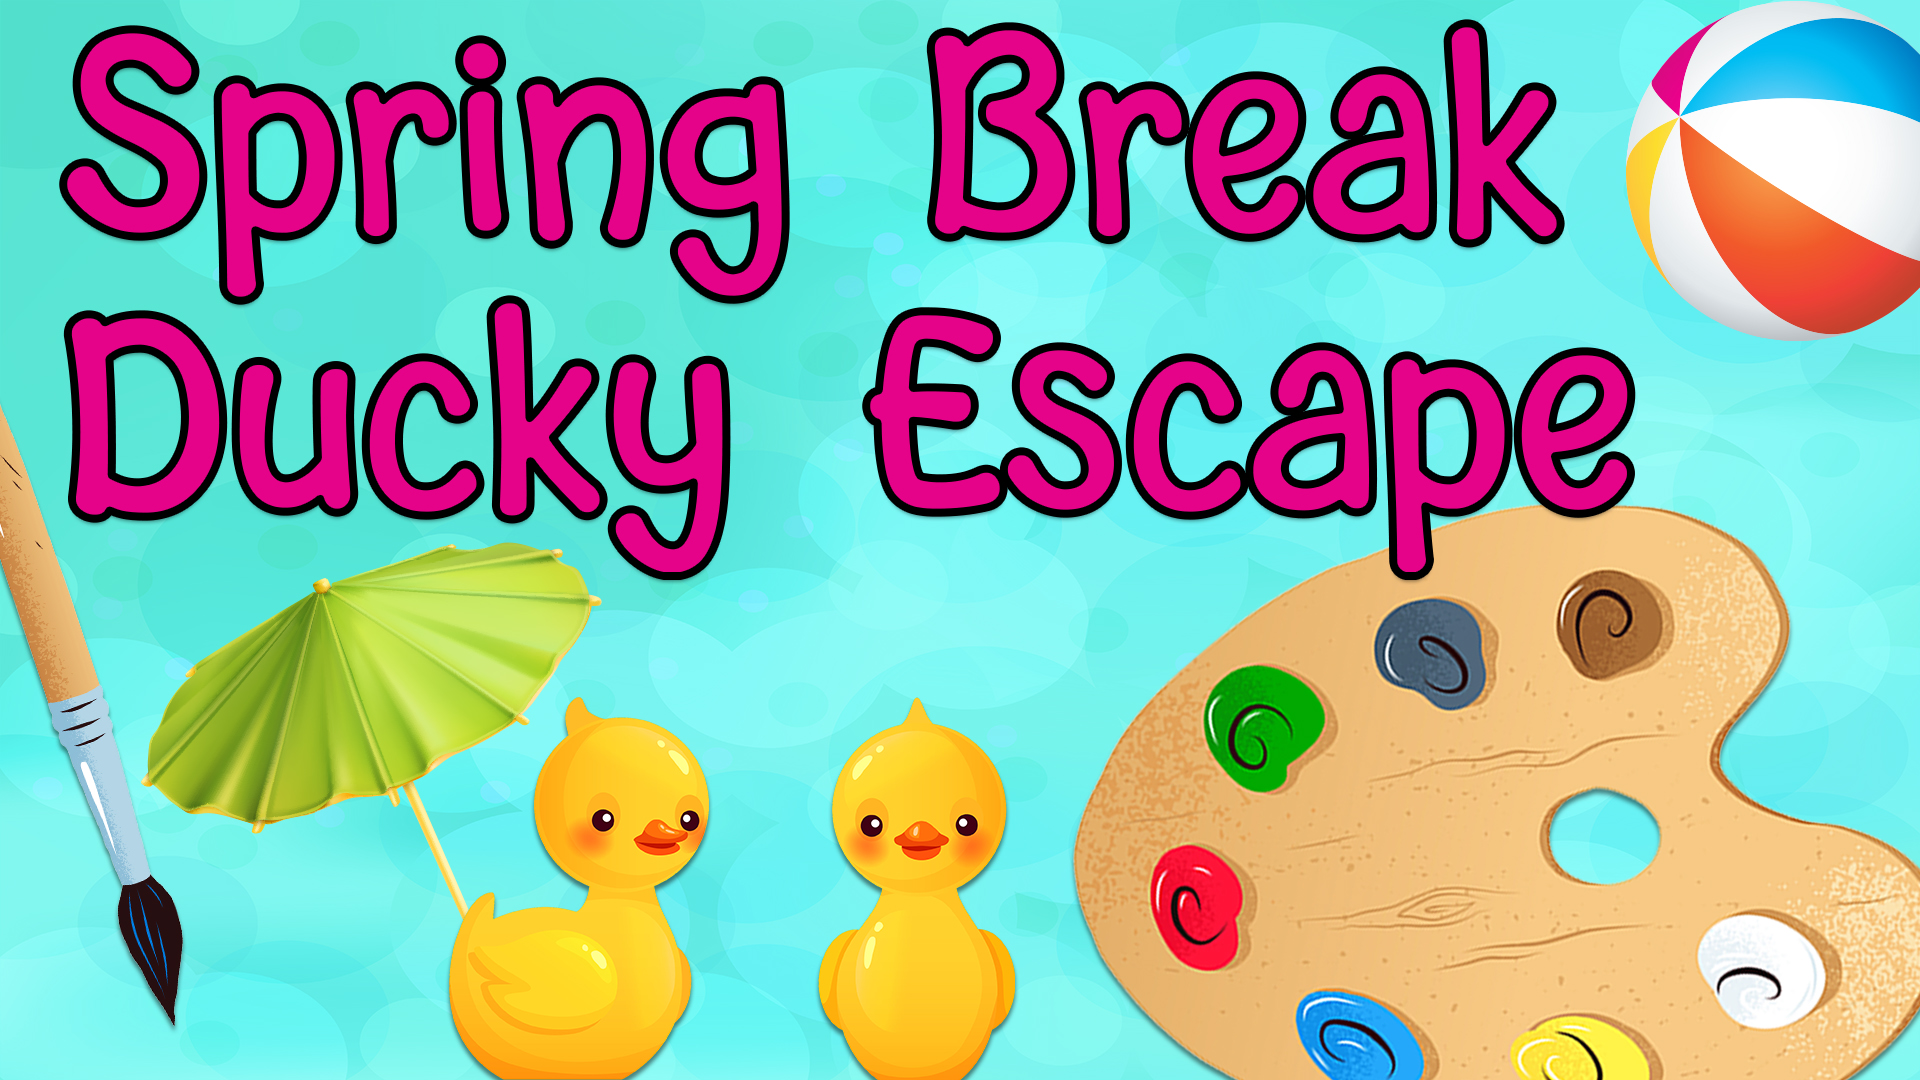 Image reads "Spring Break Ducky Escape" against a blue background. Two rubber ducks and a paint brush are under the title and an umbrella is behind the left duck. A paint palette is in the bottom right corner and a beach ball is in the top right corner.